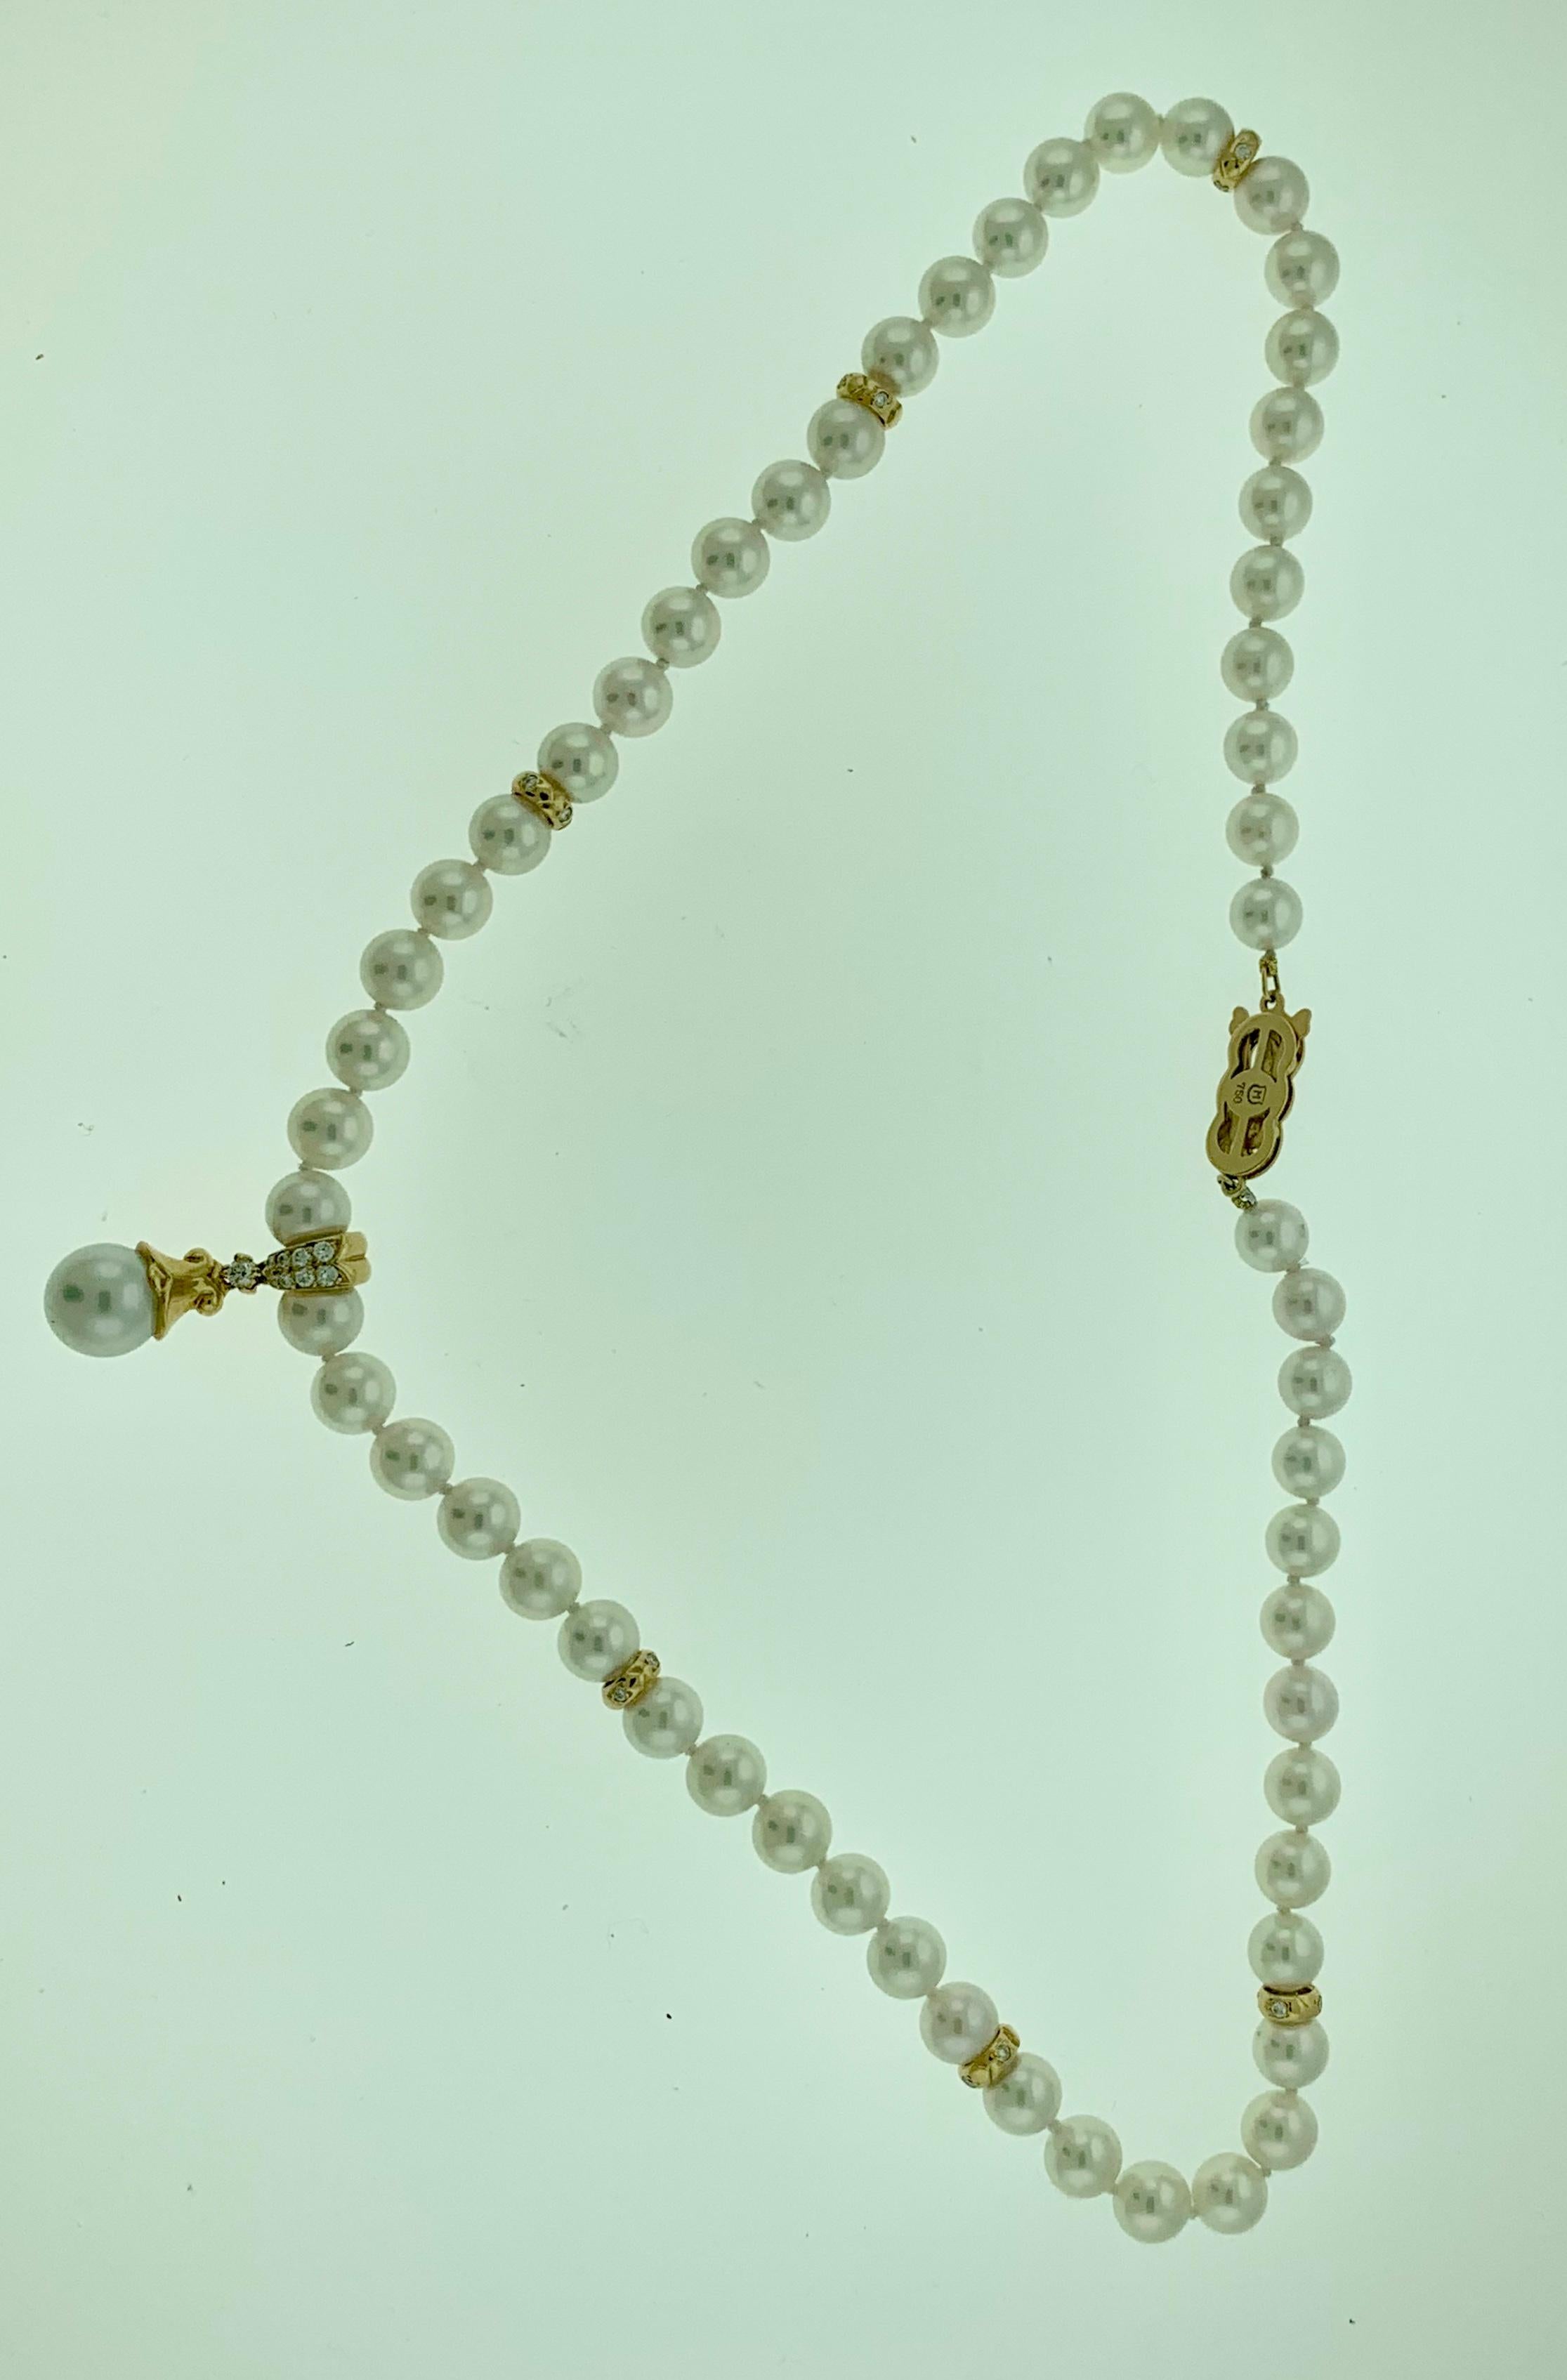 pearl necklace with drop pendant